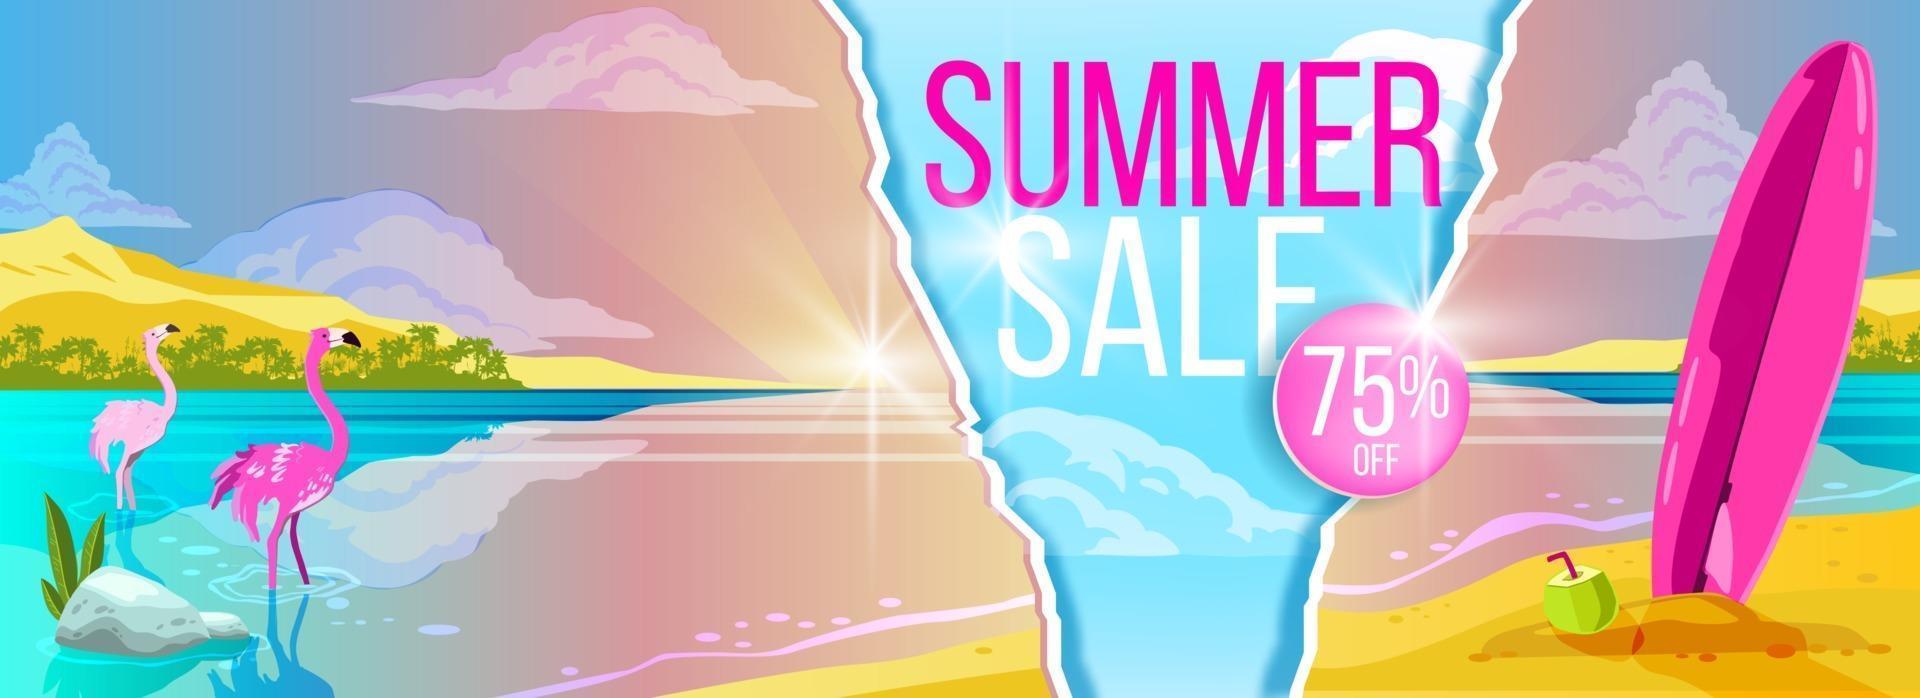 Summer sale banner, tropical beach, pink flamingo, surfboard, exotic paradise background vector